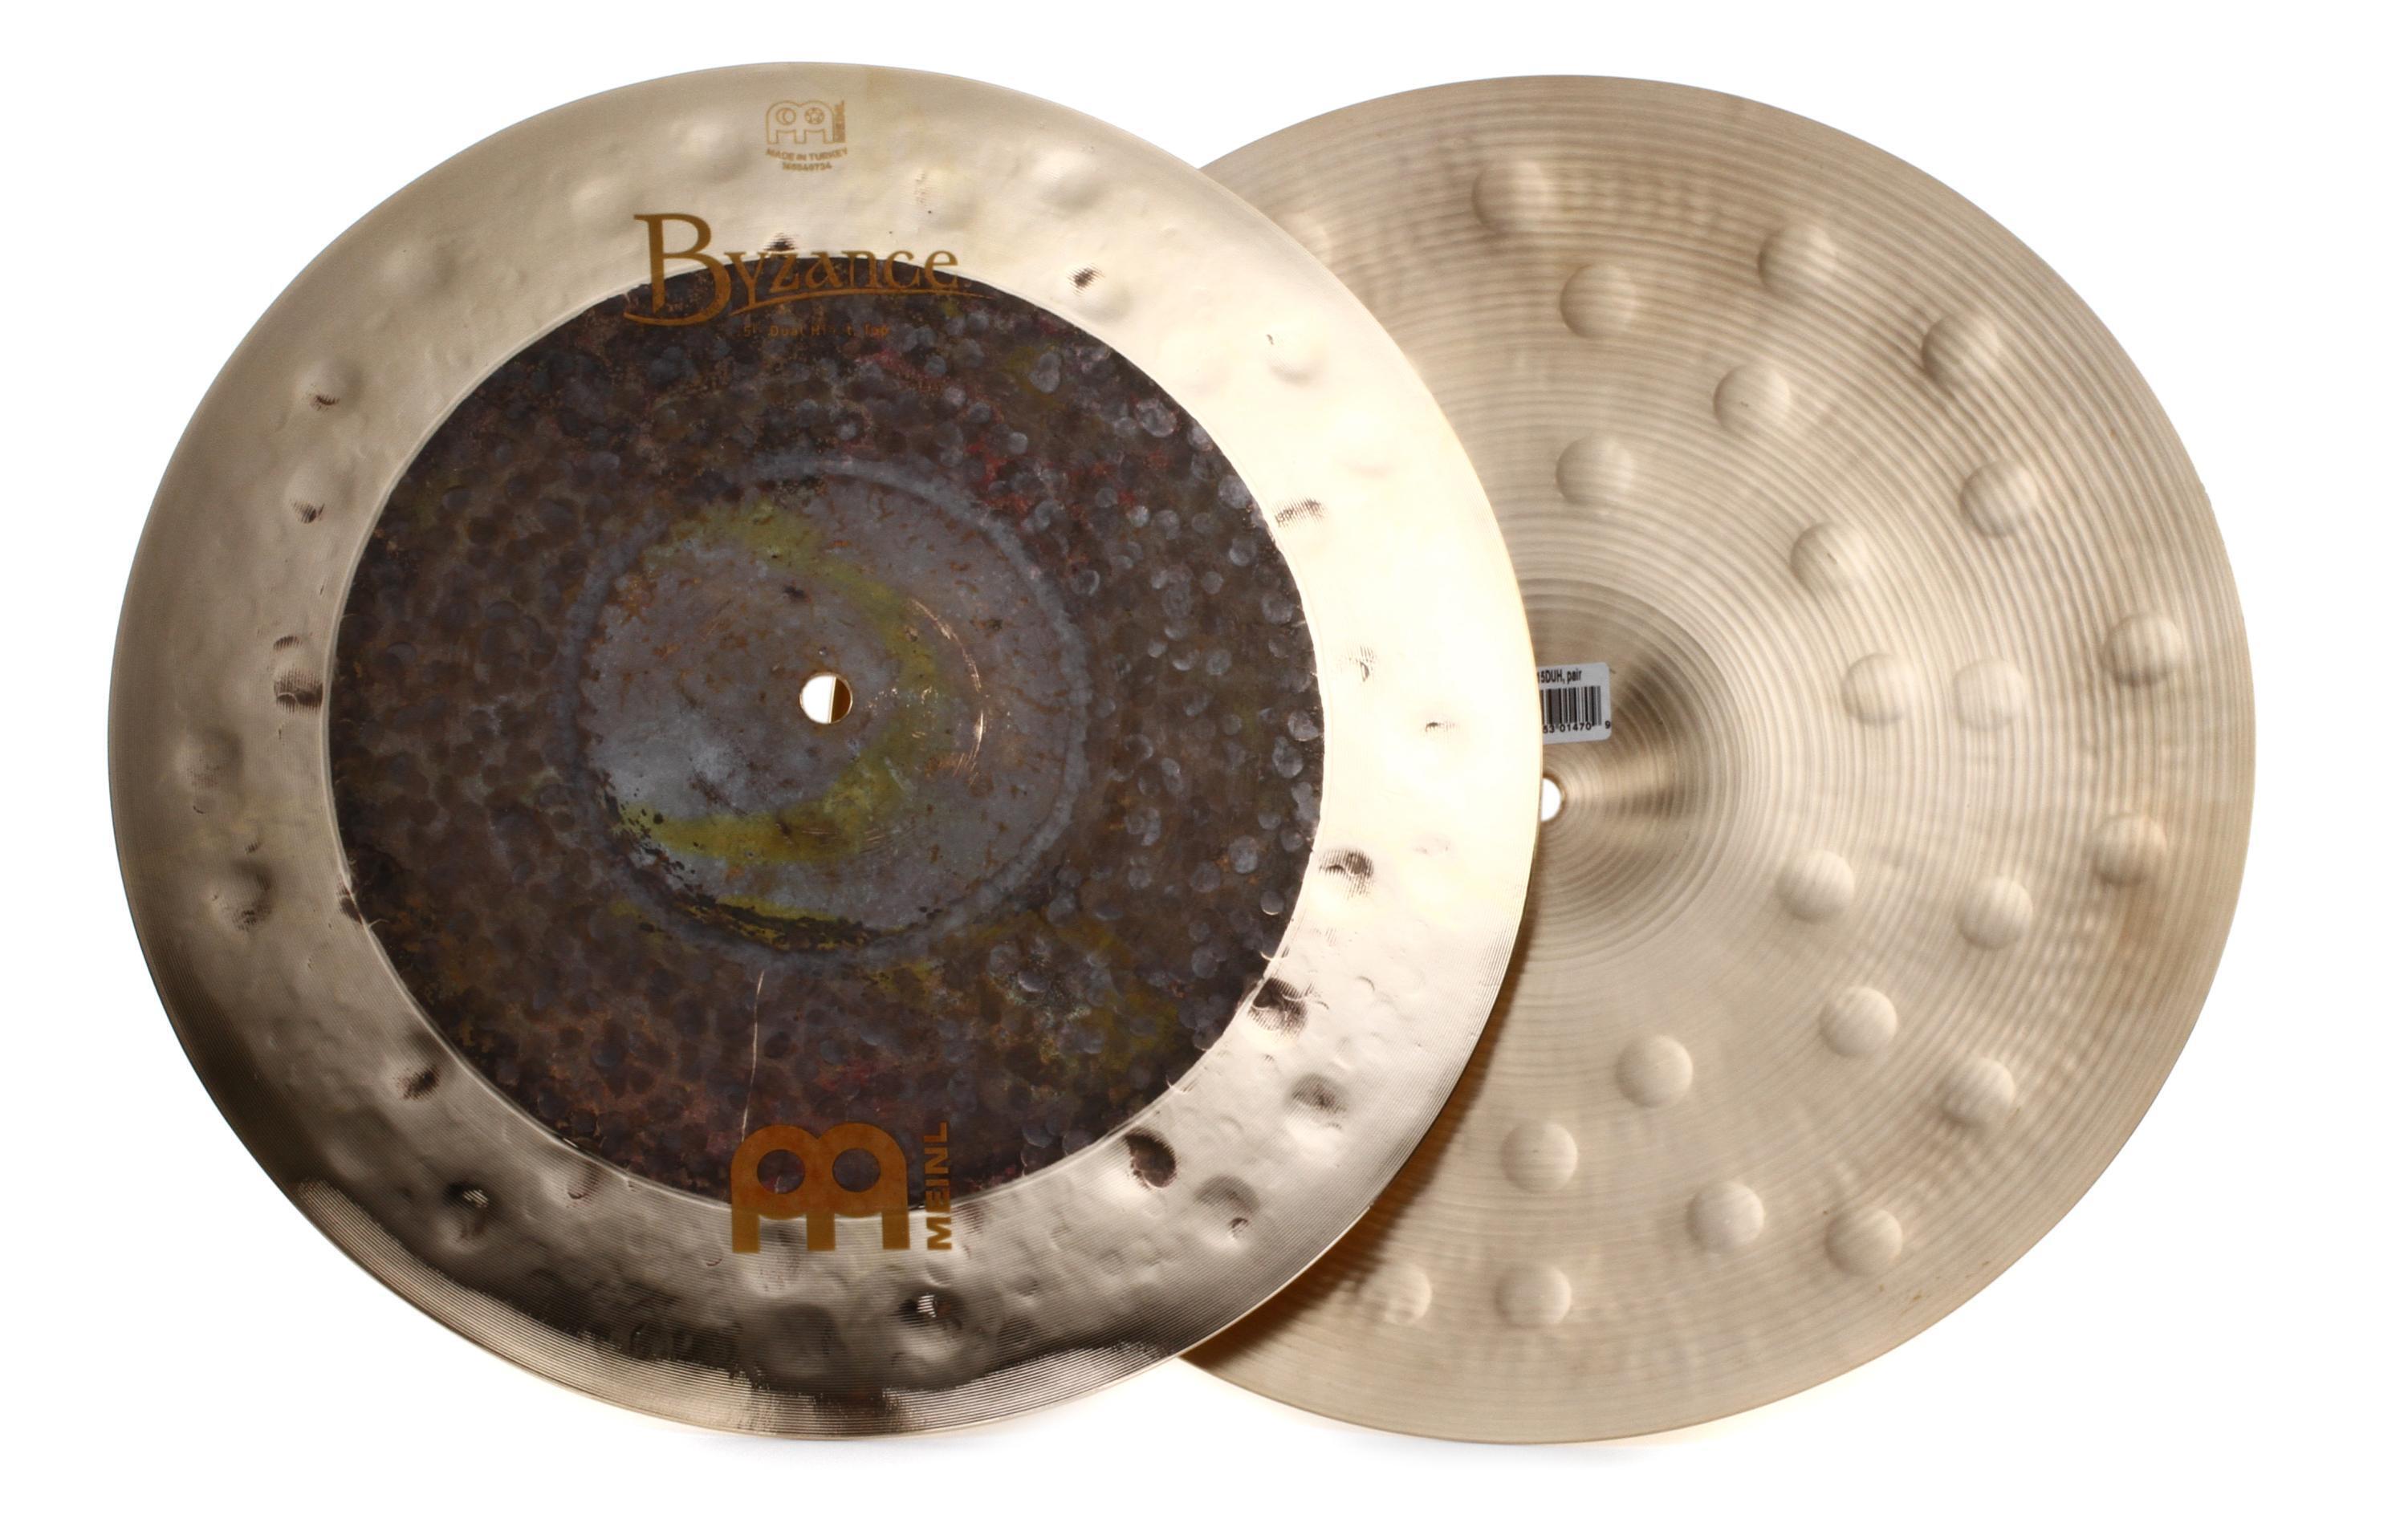 Meinl Cymbals 15 inch Byzance Dual Hi-hat Cymbals | Sweetwater